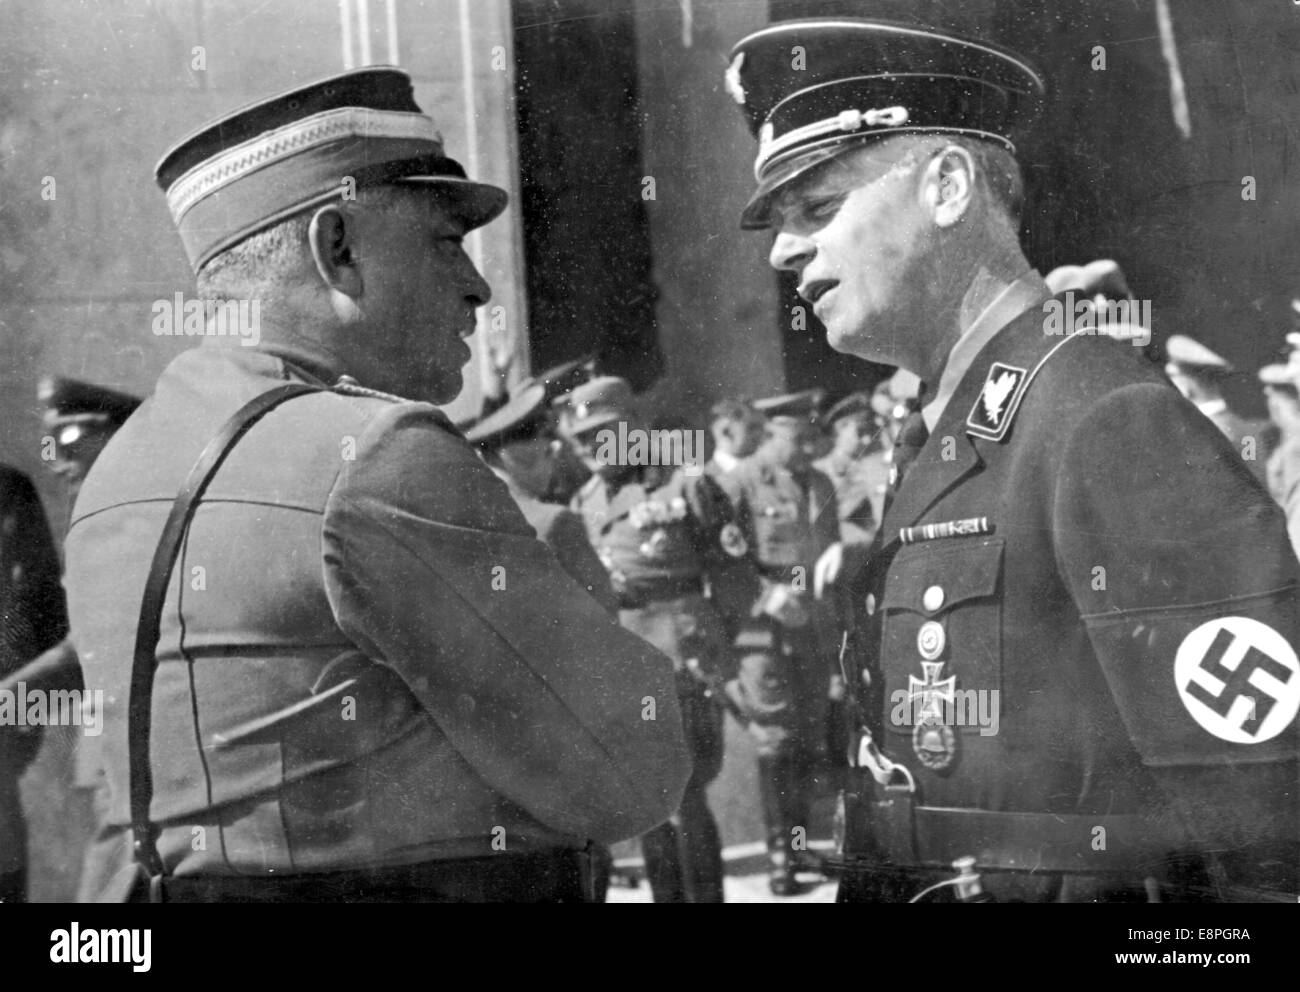 Nuremberg Rally 1937 in Nuremberg, Germany - German ambassador to the United Kingdom Joachim von Ribbentrop (R) talks to Reich Minister Hans Kerrl in front of Luitpold Hall on the occasion of the start of the party congress at the Nazi party rally ground. (Flaws in quality due to the historic picture copy) Fotoarchiv für Zeitgeschichtee - NO WIRE SERVICE - Stock Photo